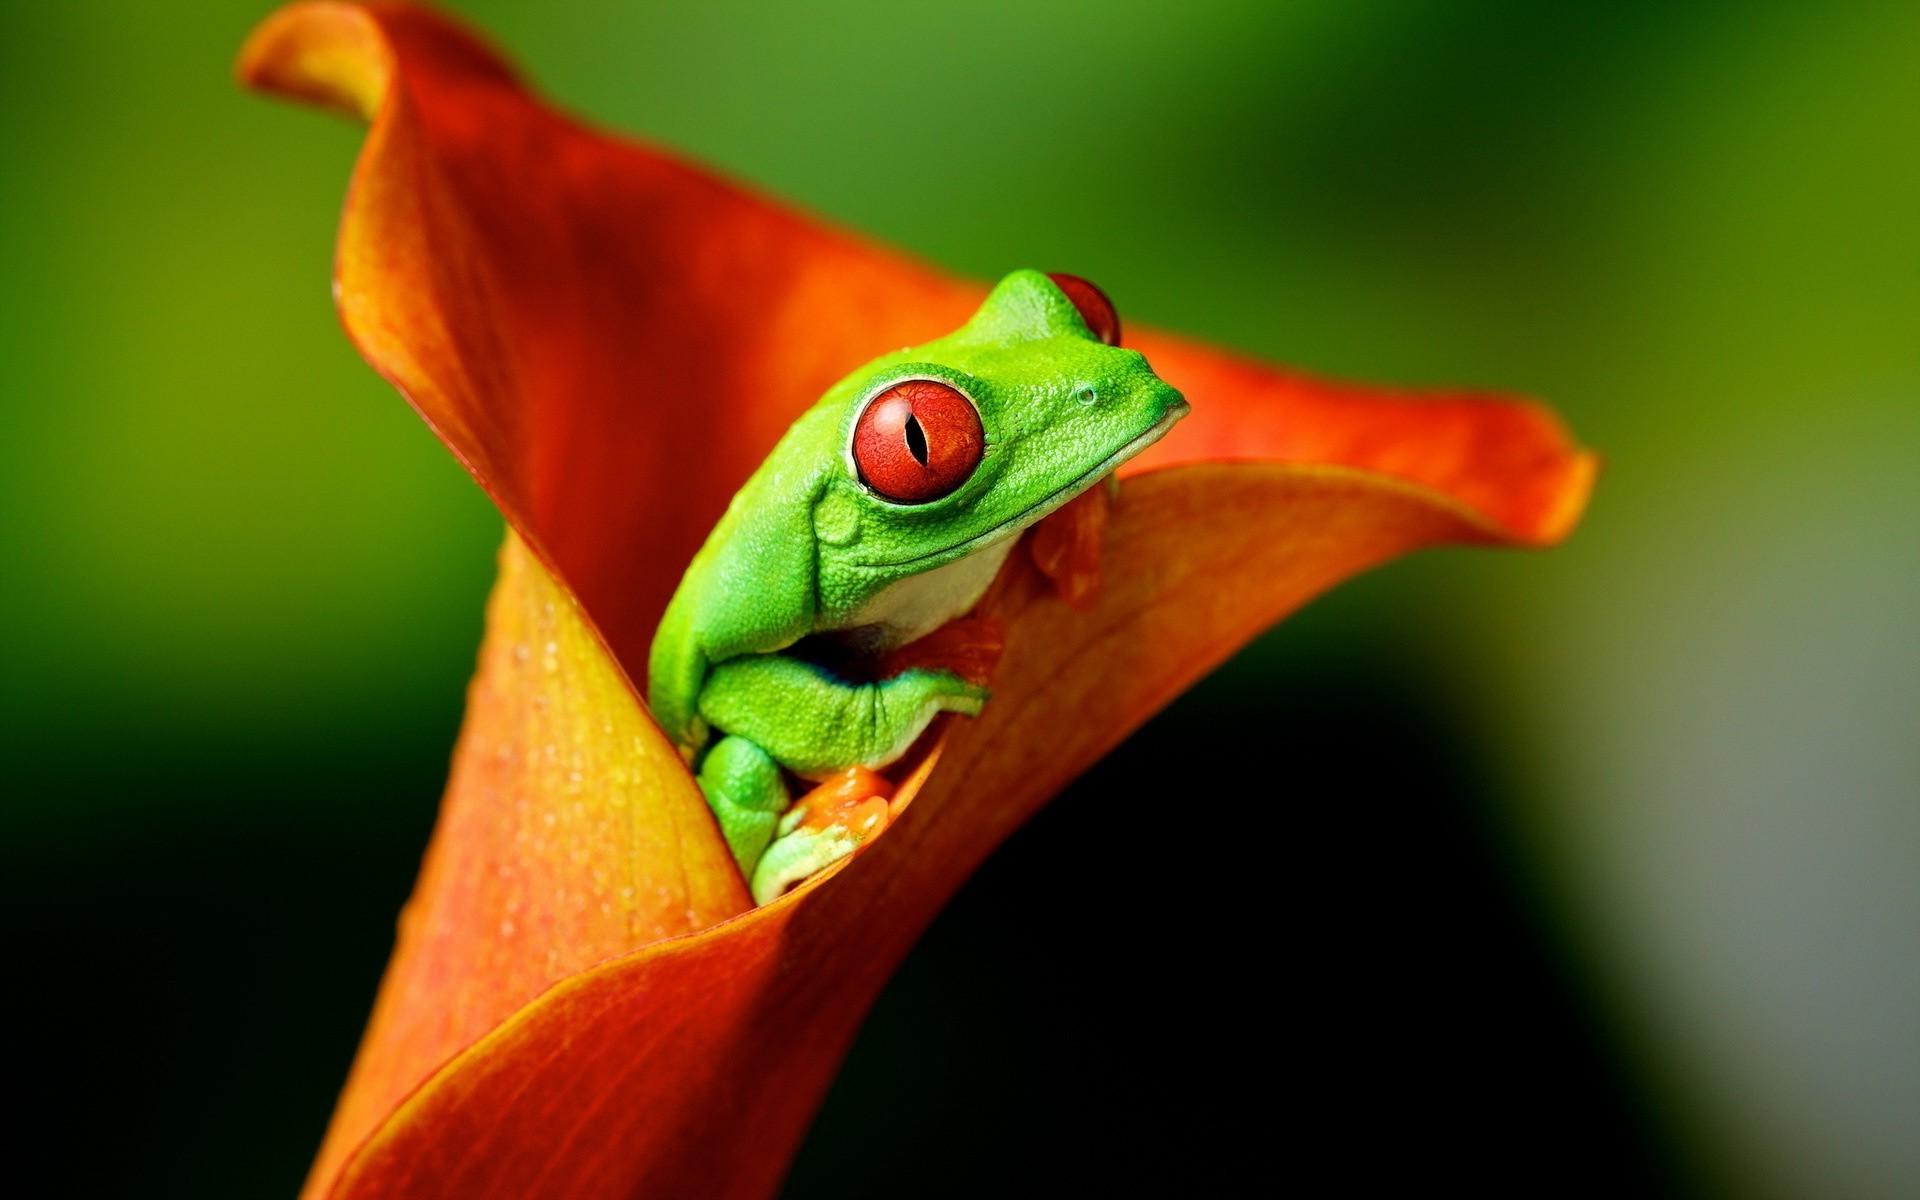 Wallpaper, animals, flowers, amphibian, Red Eyed Tree Frogs